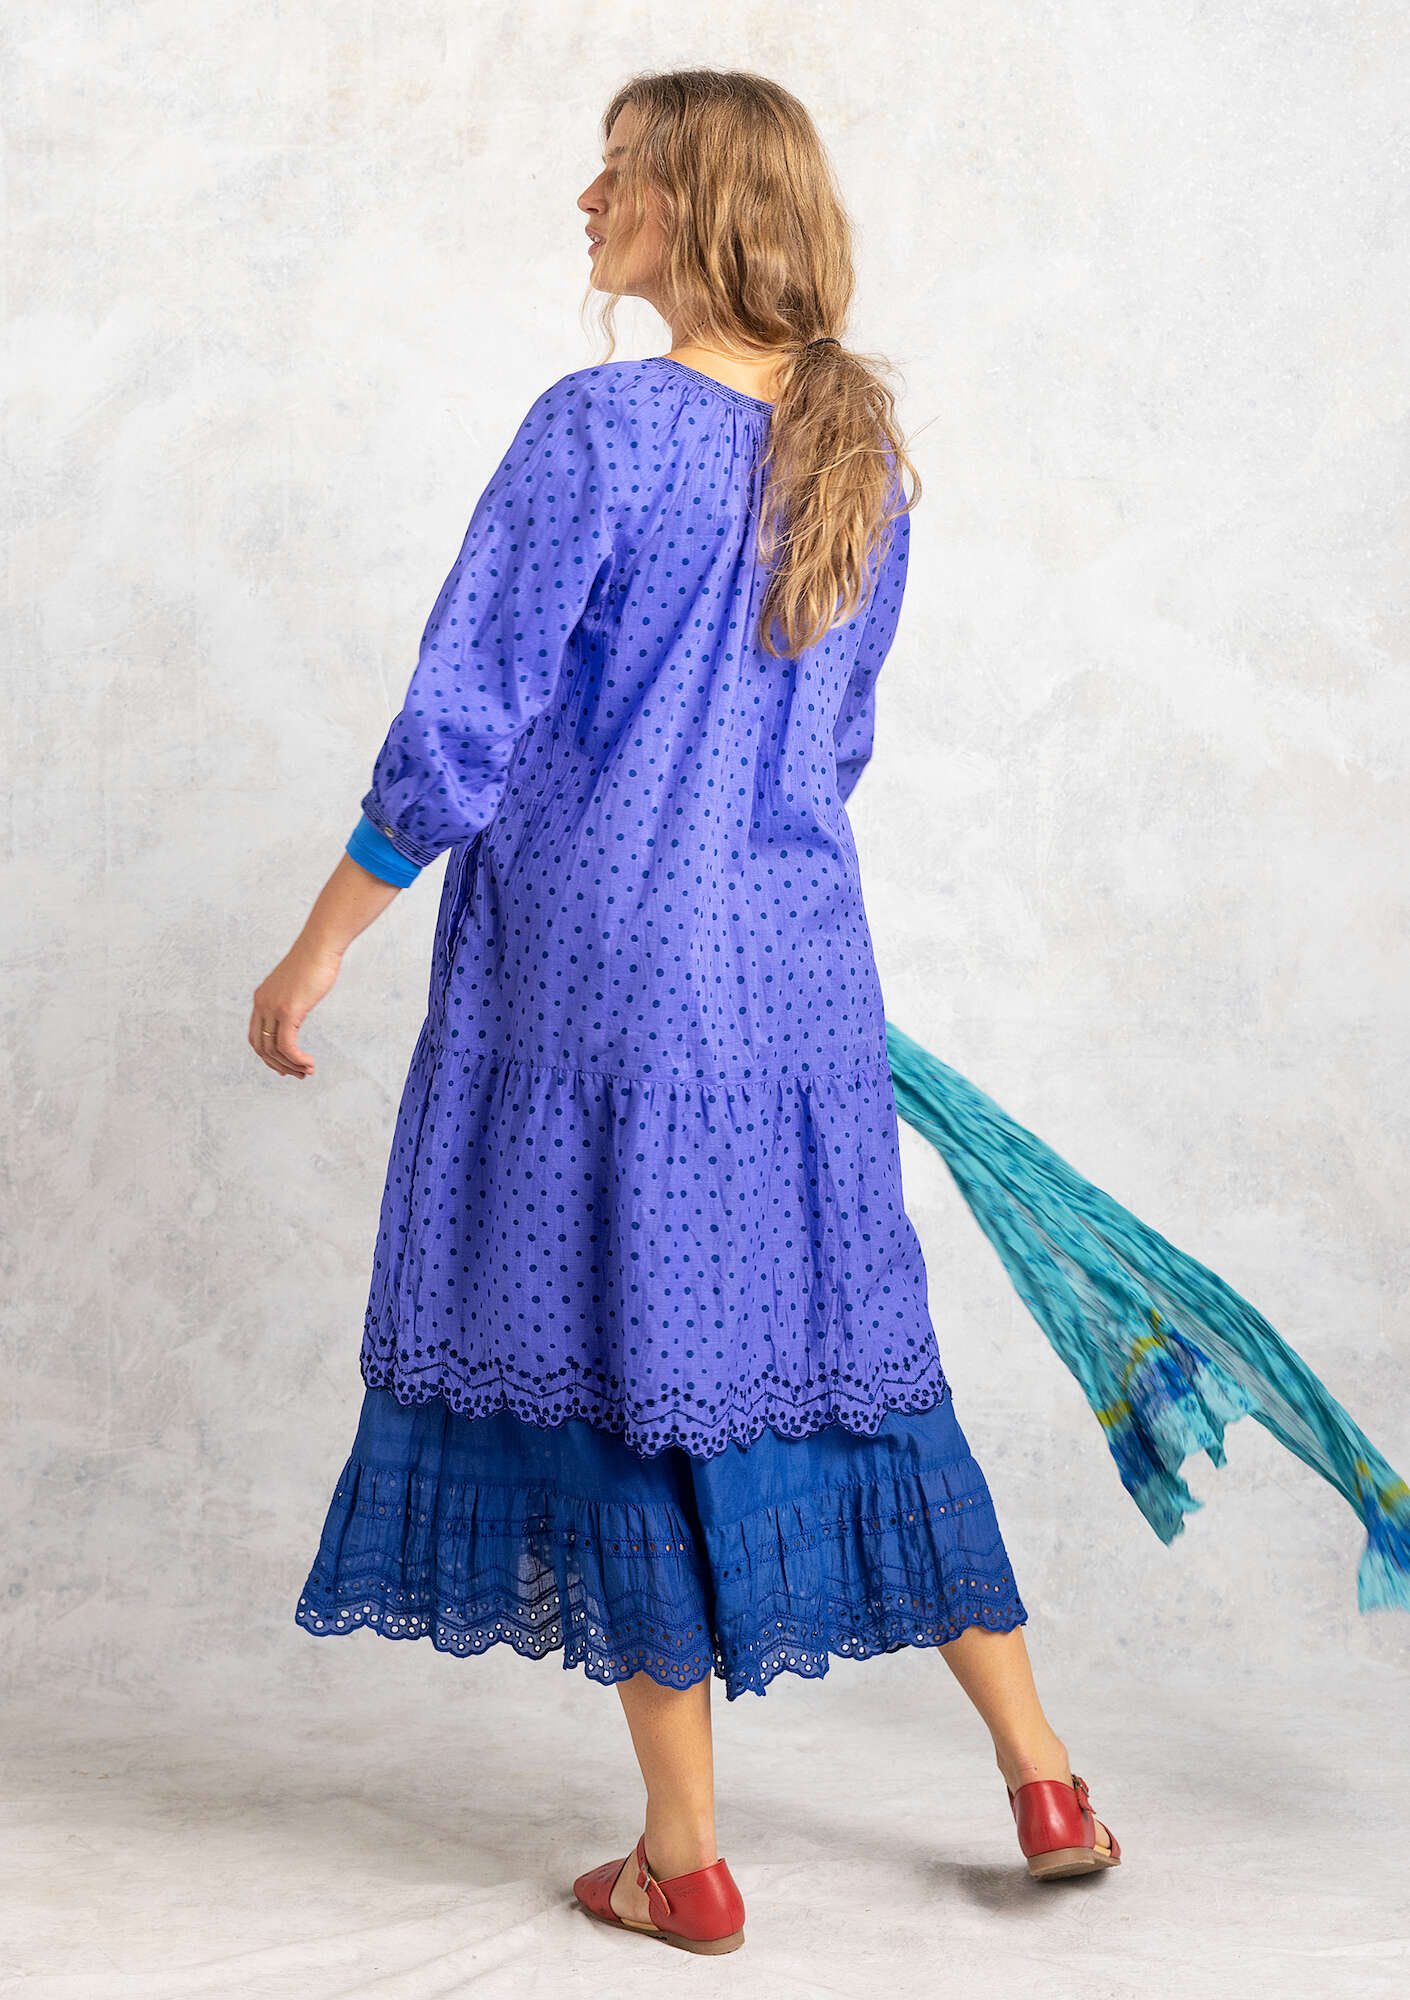 Woven “Lilly” dress in organic cotton blue lotus